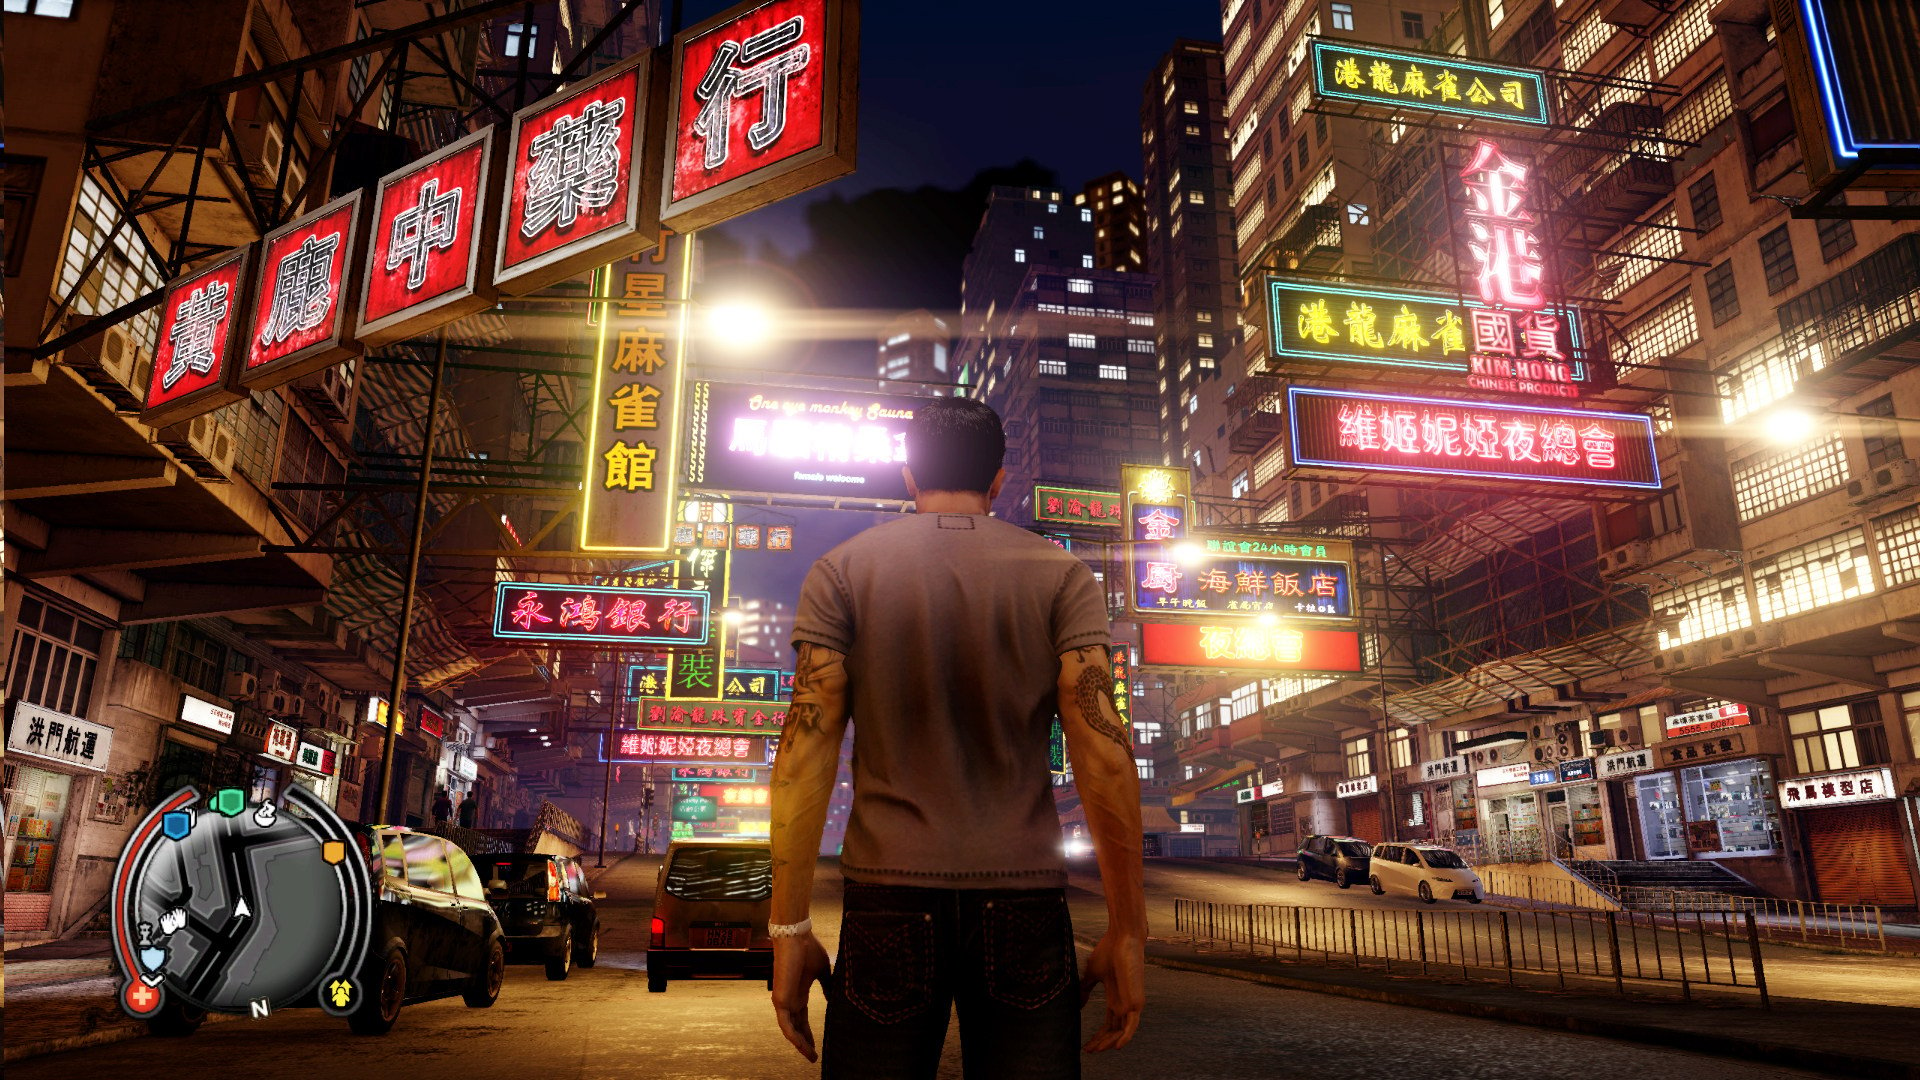 3 ways GTA 5 and Sleeping Dogs differ (& 2 ways they're similar)